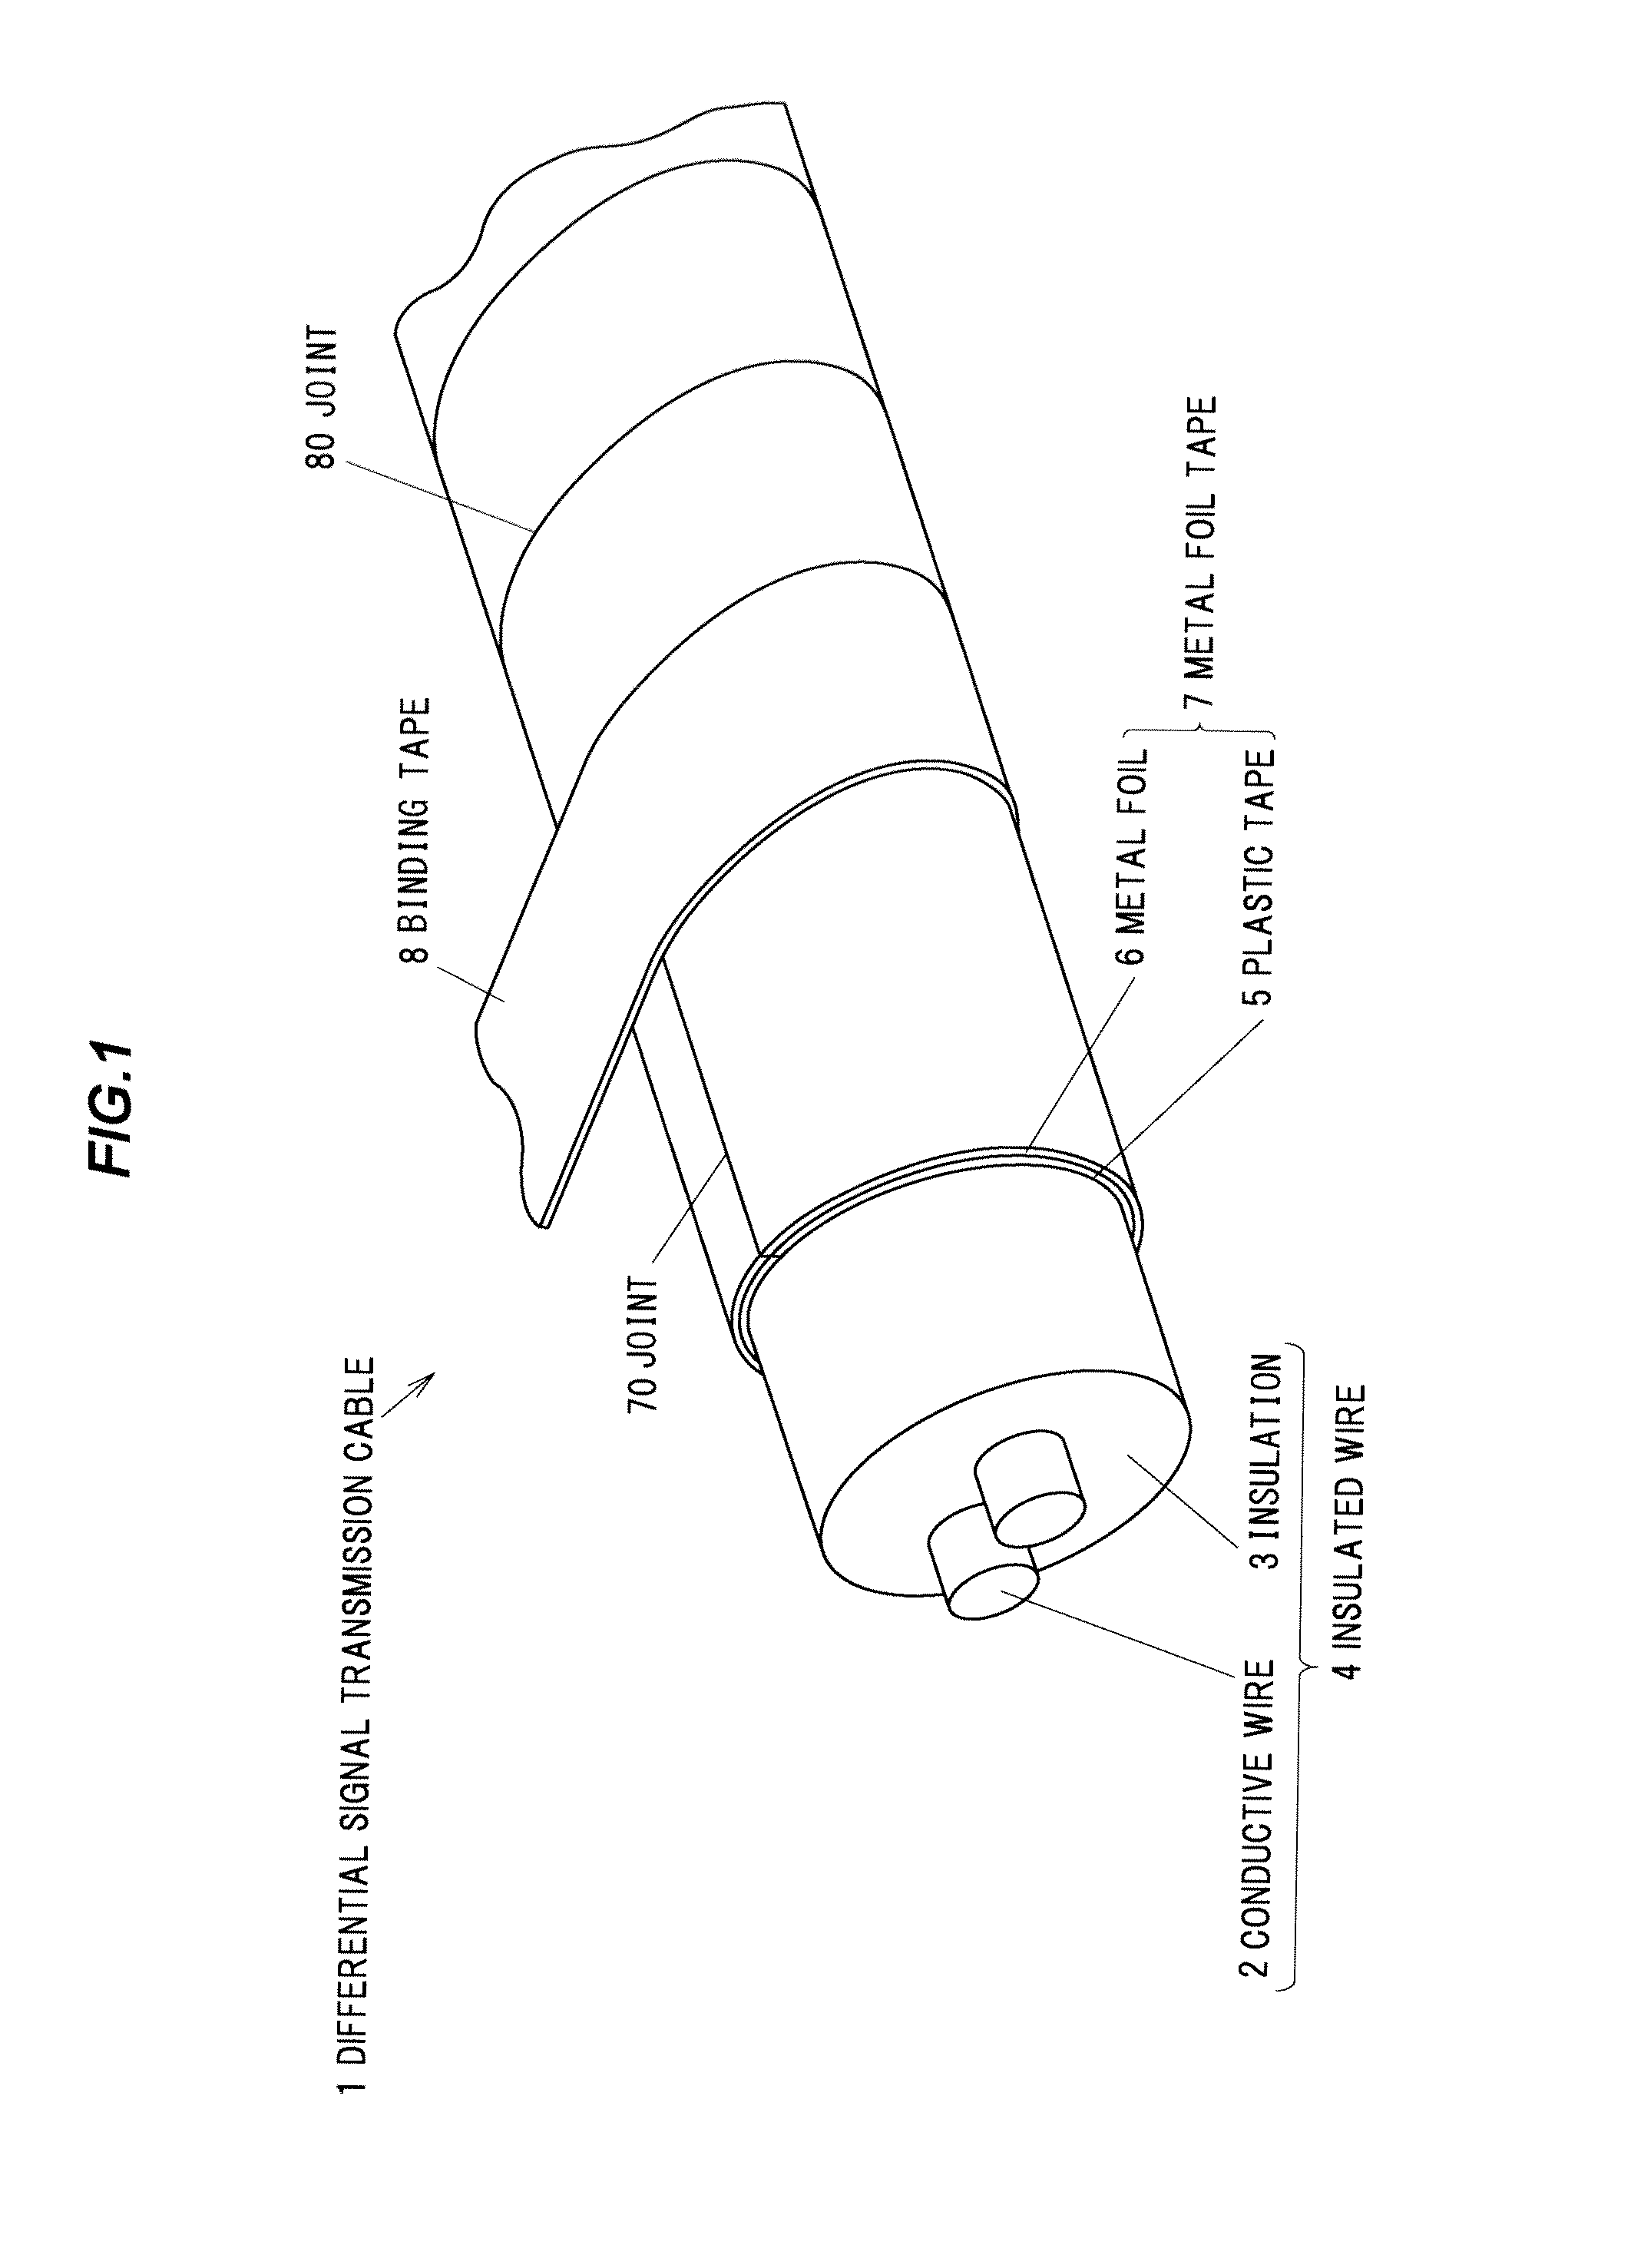 Differential signal transmission cable